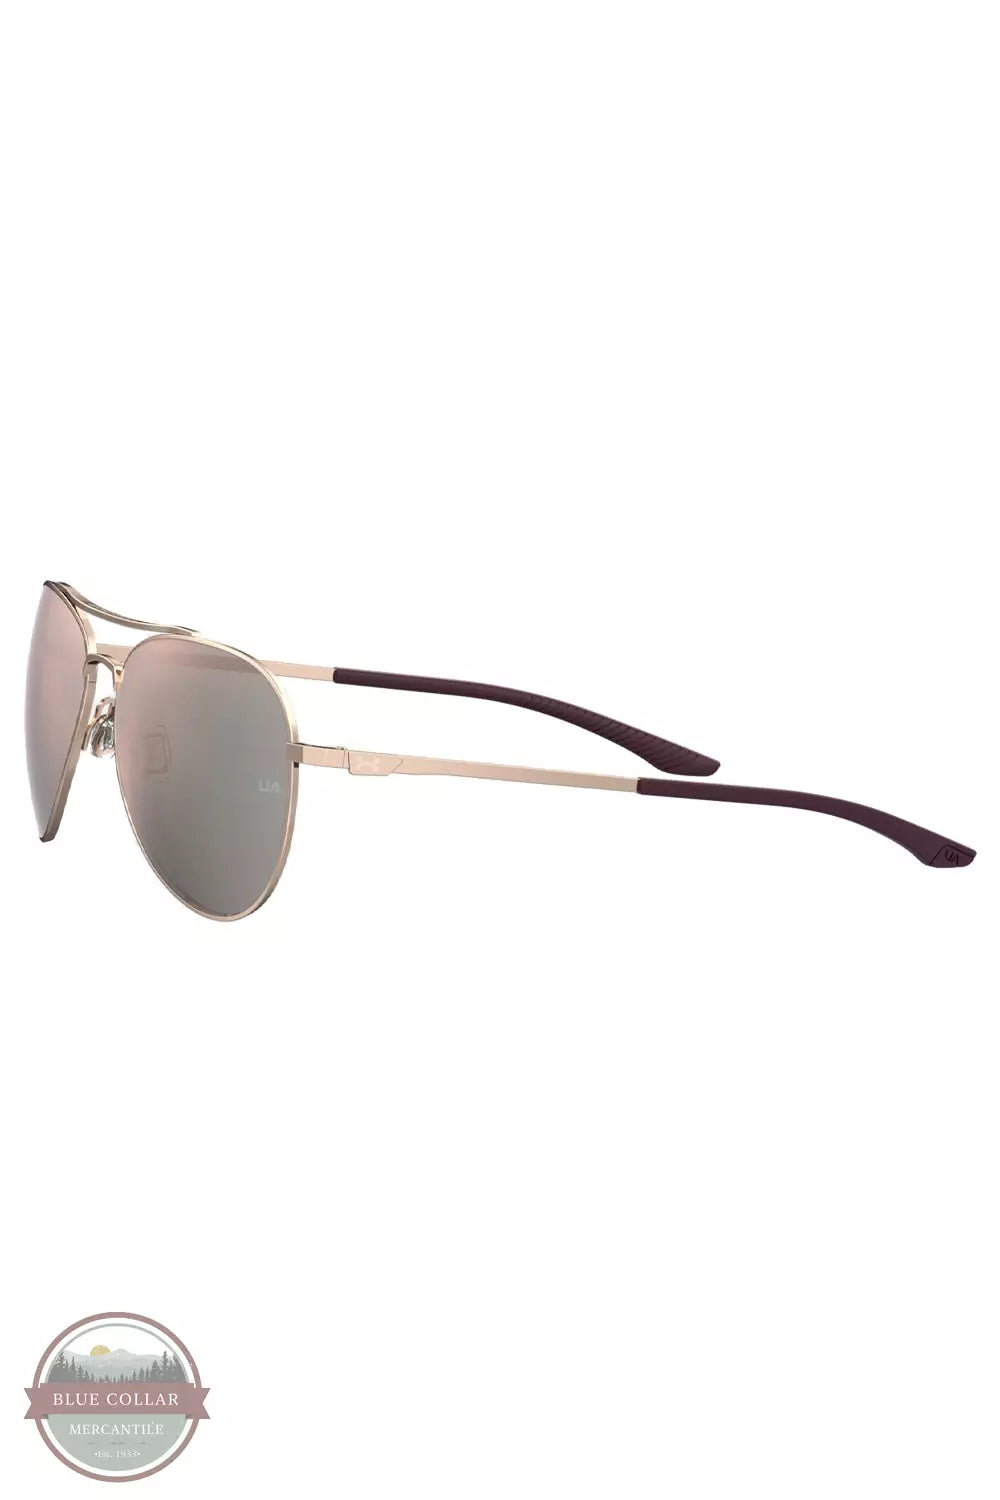 Under Armour 1368758-900 Instinct Mirror Sunglasses in Rose Gold Side View